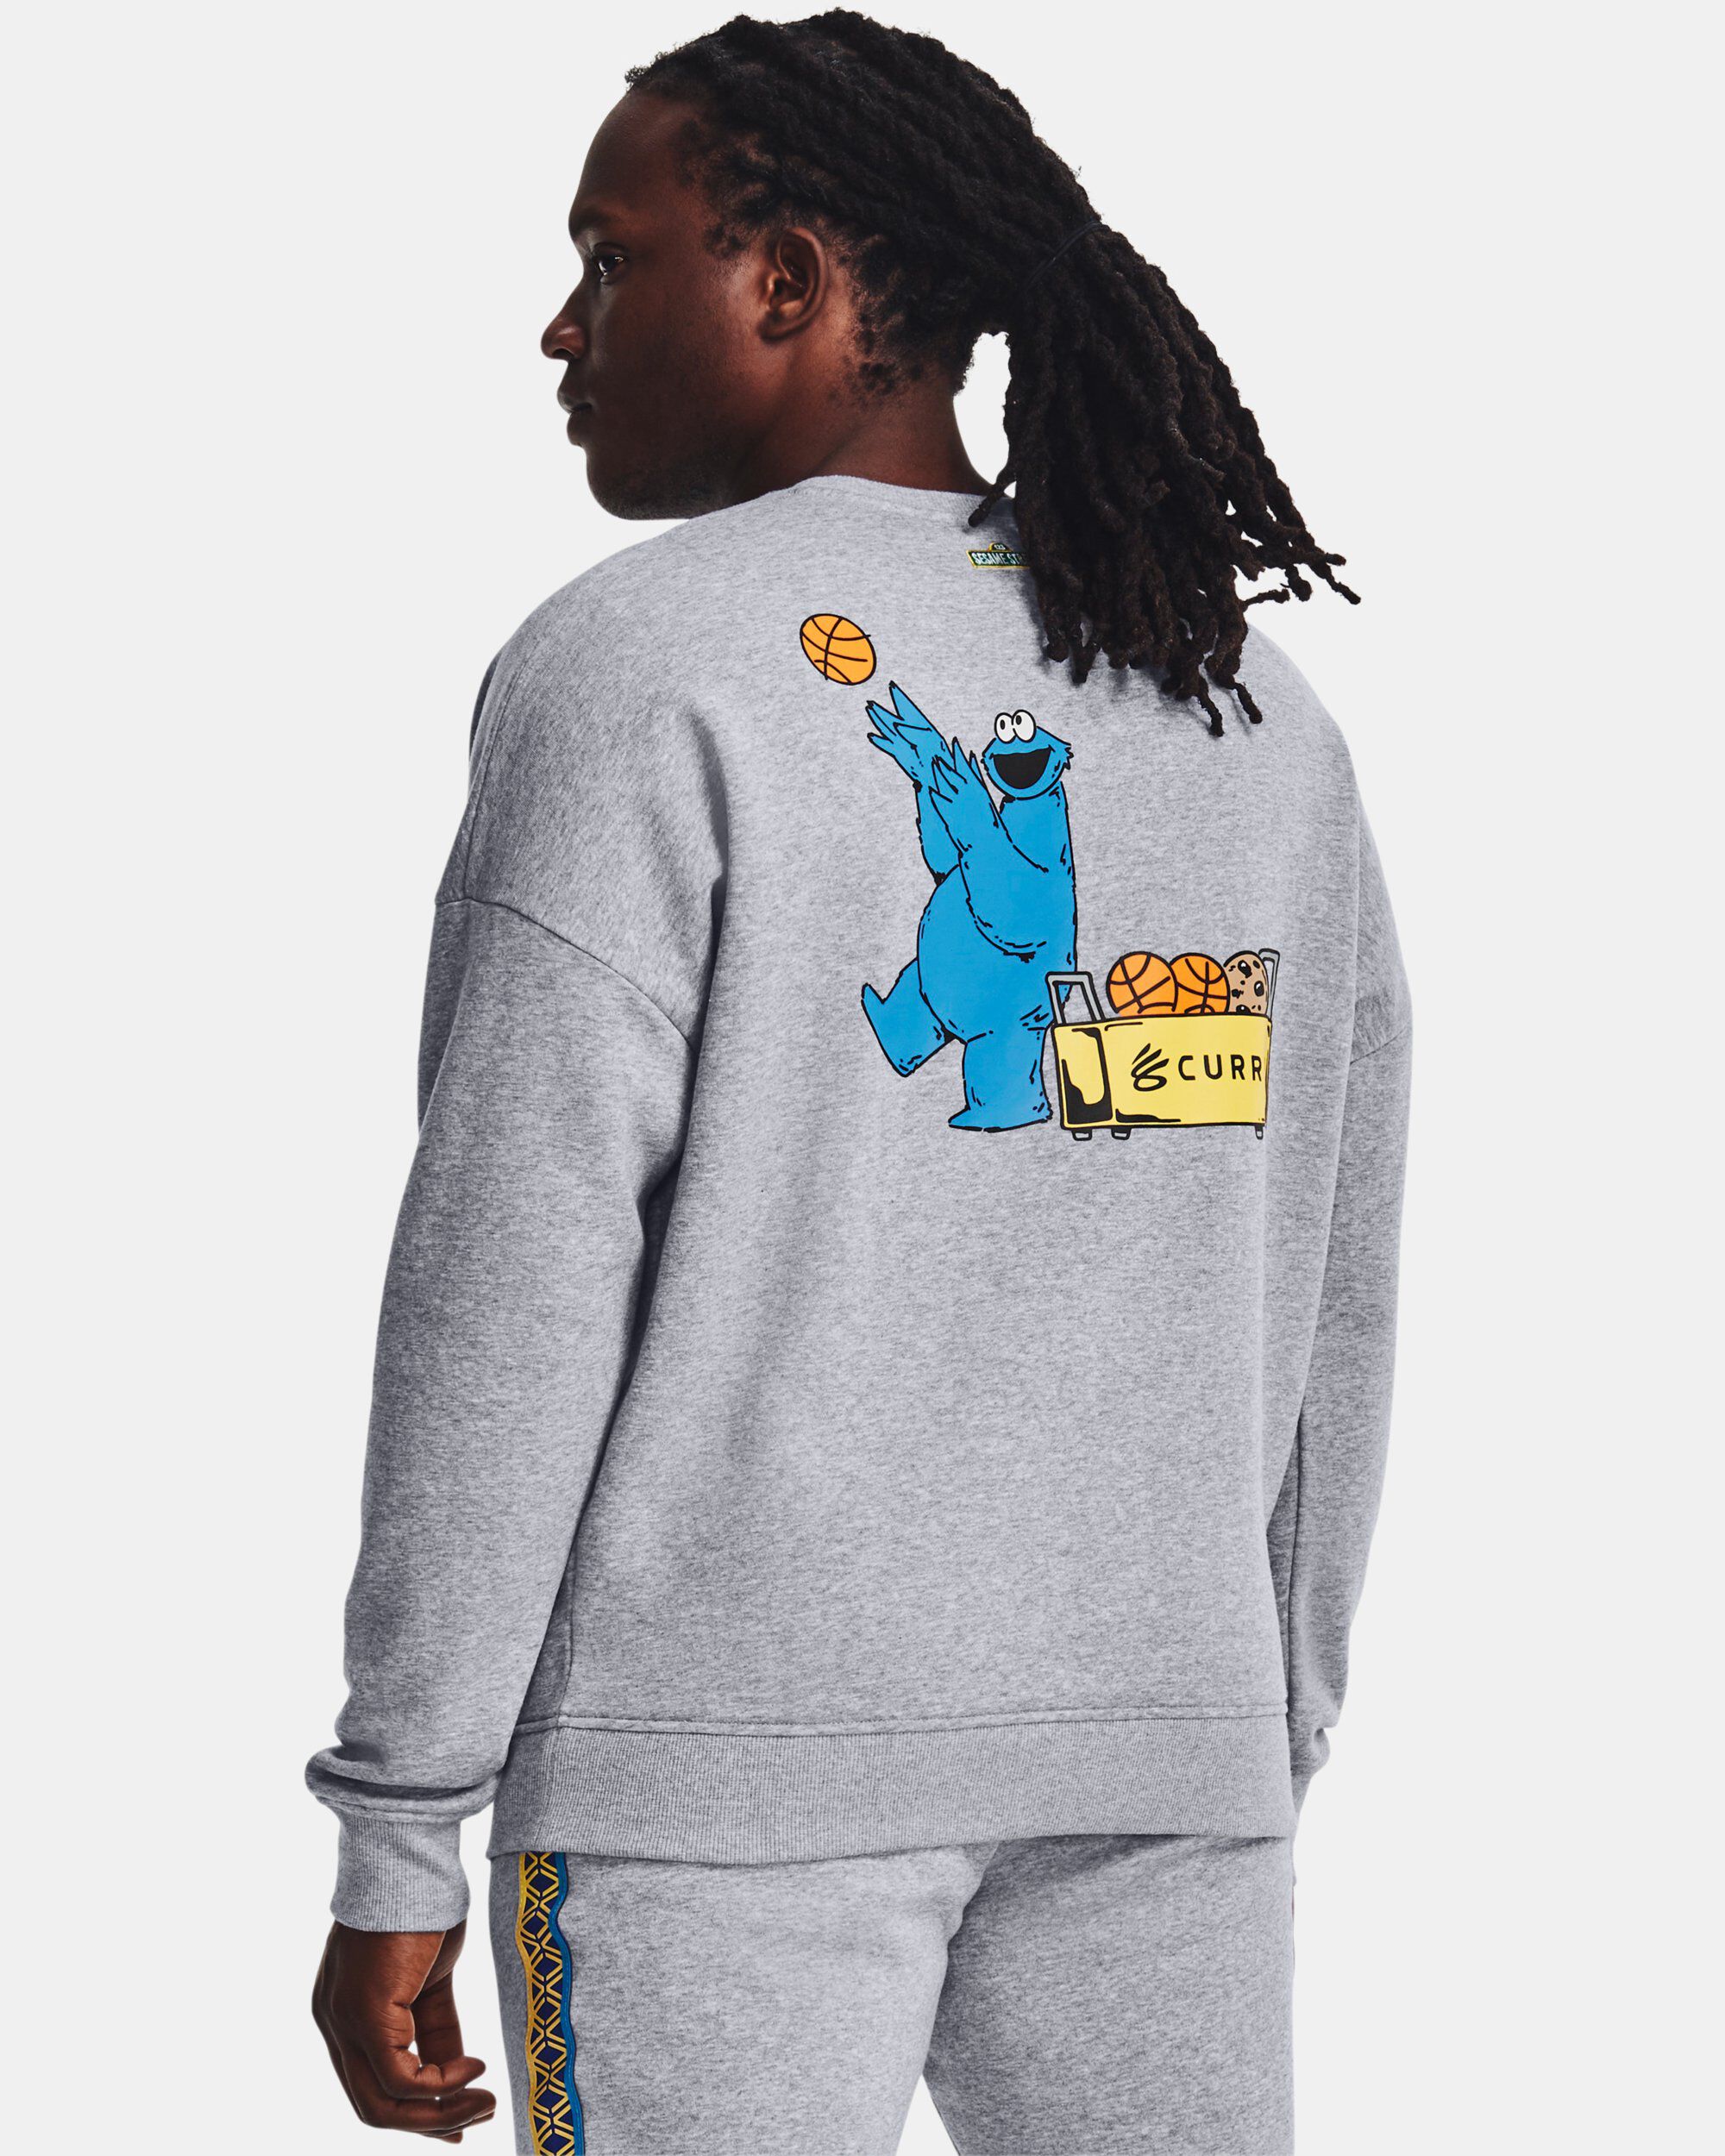 UA Curry Brand X Sesame Street Collection Collection in Dubai, UAE 